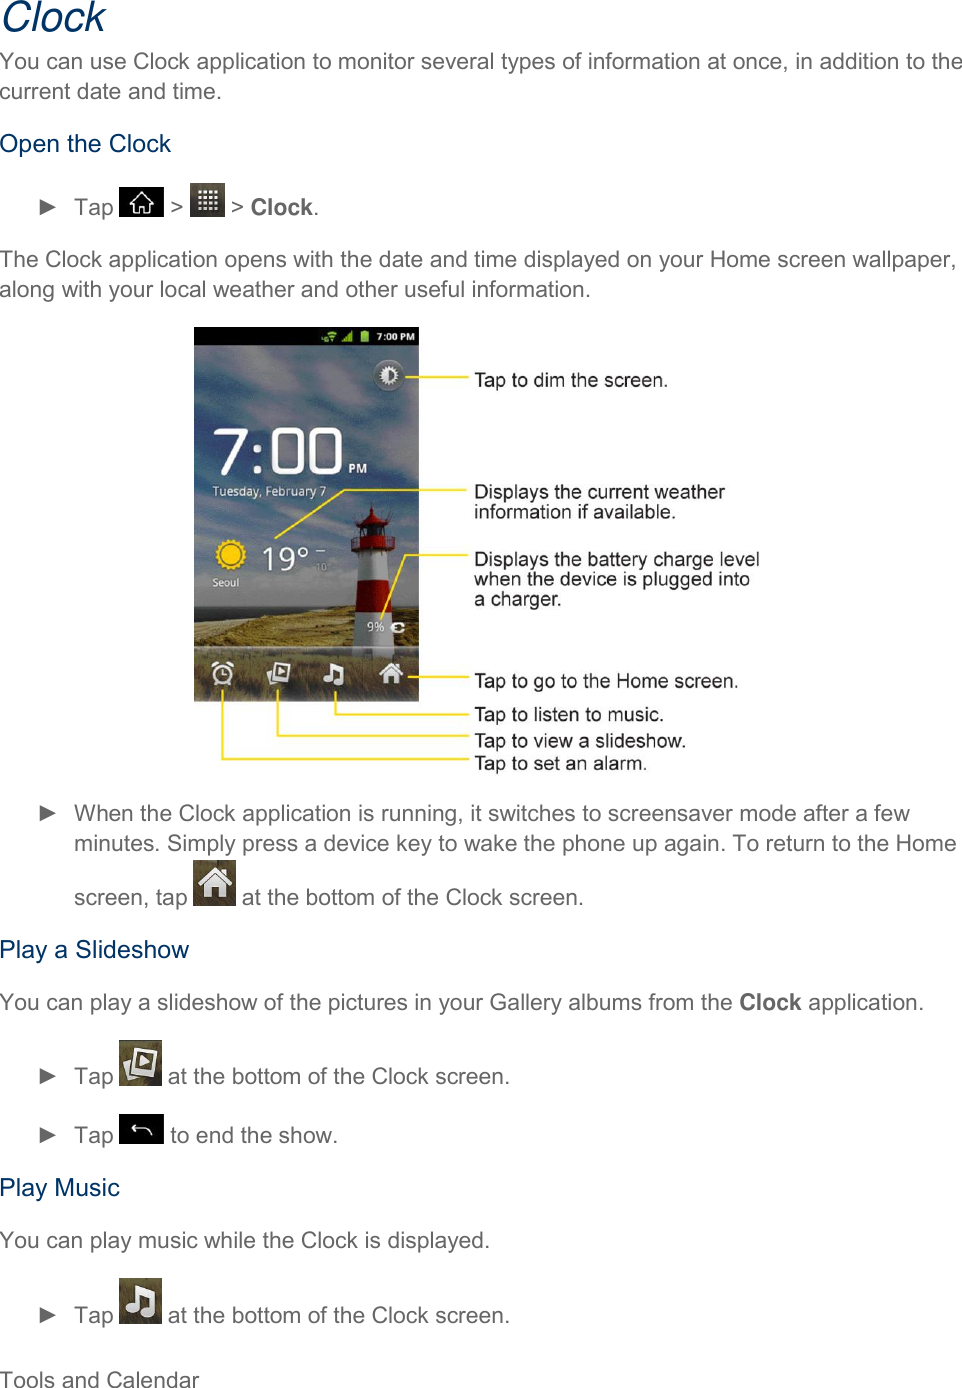  Tools and Calendar     Clock You can use Clock application to monitor several types of information at once, in addition to the current date and time. Open the Clock ►  Tap   &gt;   &gt; Clock. The Clock application opens with the date and time displayed on your Home screen wallpaper, along with your local weather and other useful information.  ►  When the Clock application is running, it switches to screensaver mode after a few minutes. Simply press a device key to wake the phone up again. To return to the Home screen, tap   at the bottom of the Clock screen. Play a Slideshow You can play a slideshow of the pictures in your Gallery albums from the Clock application. ►  Tap   at the bottom of the Clock screen. ►  Tap   to end the show. Play Music You can play music while the Clock is displayed. ►  Tap   at the bottom of the Clock screen. 